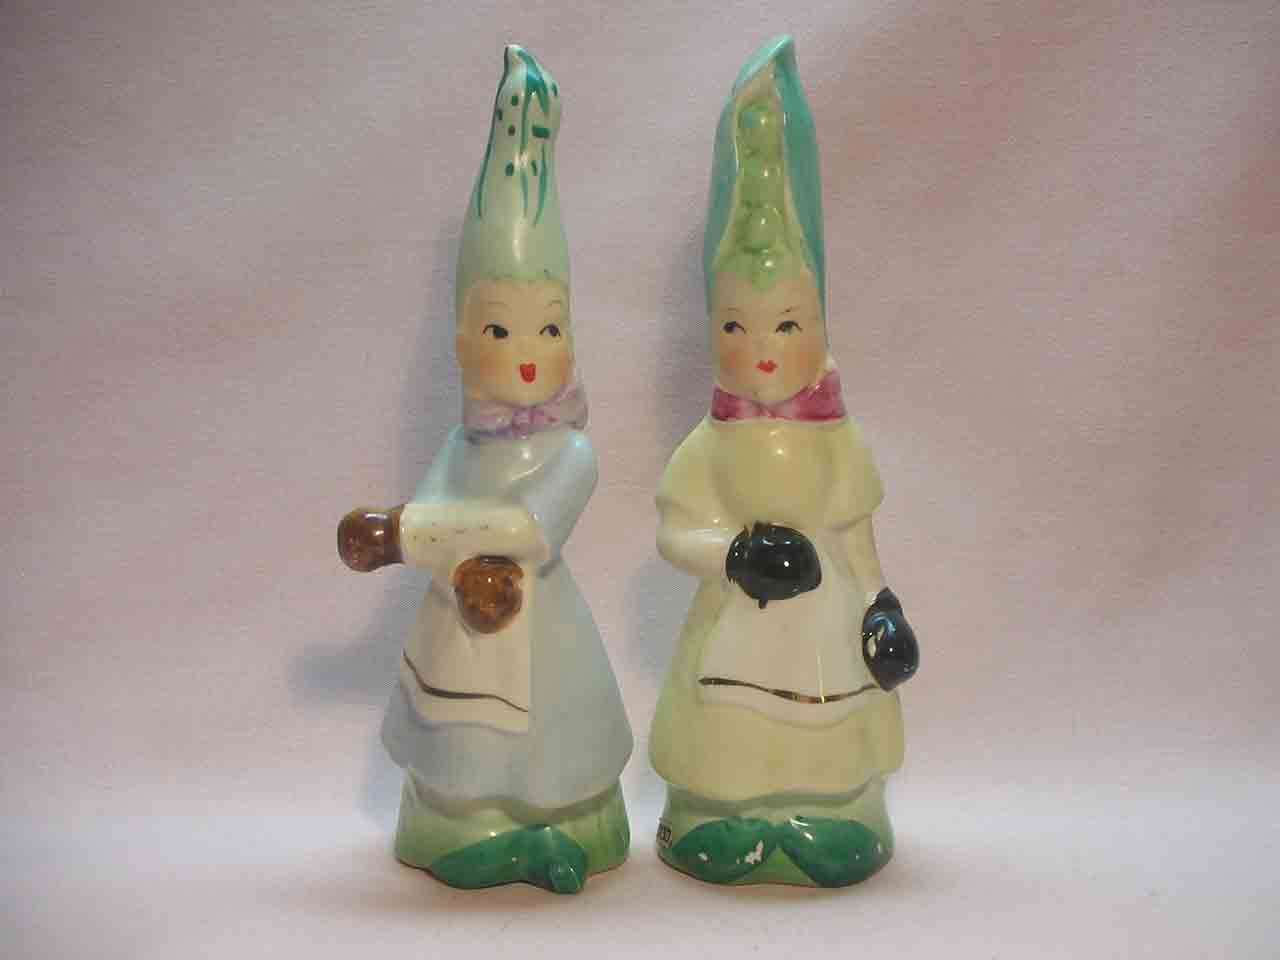 Boxing match - anthropomorphic boxing vegetable girls salt and pepper shakers